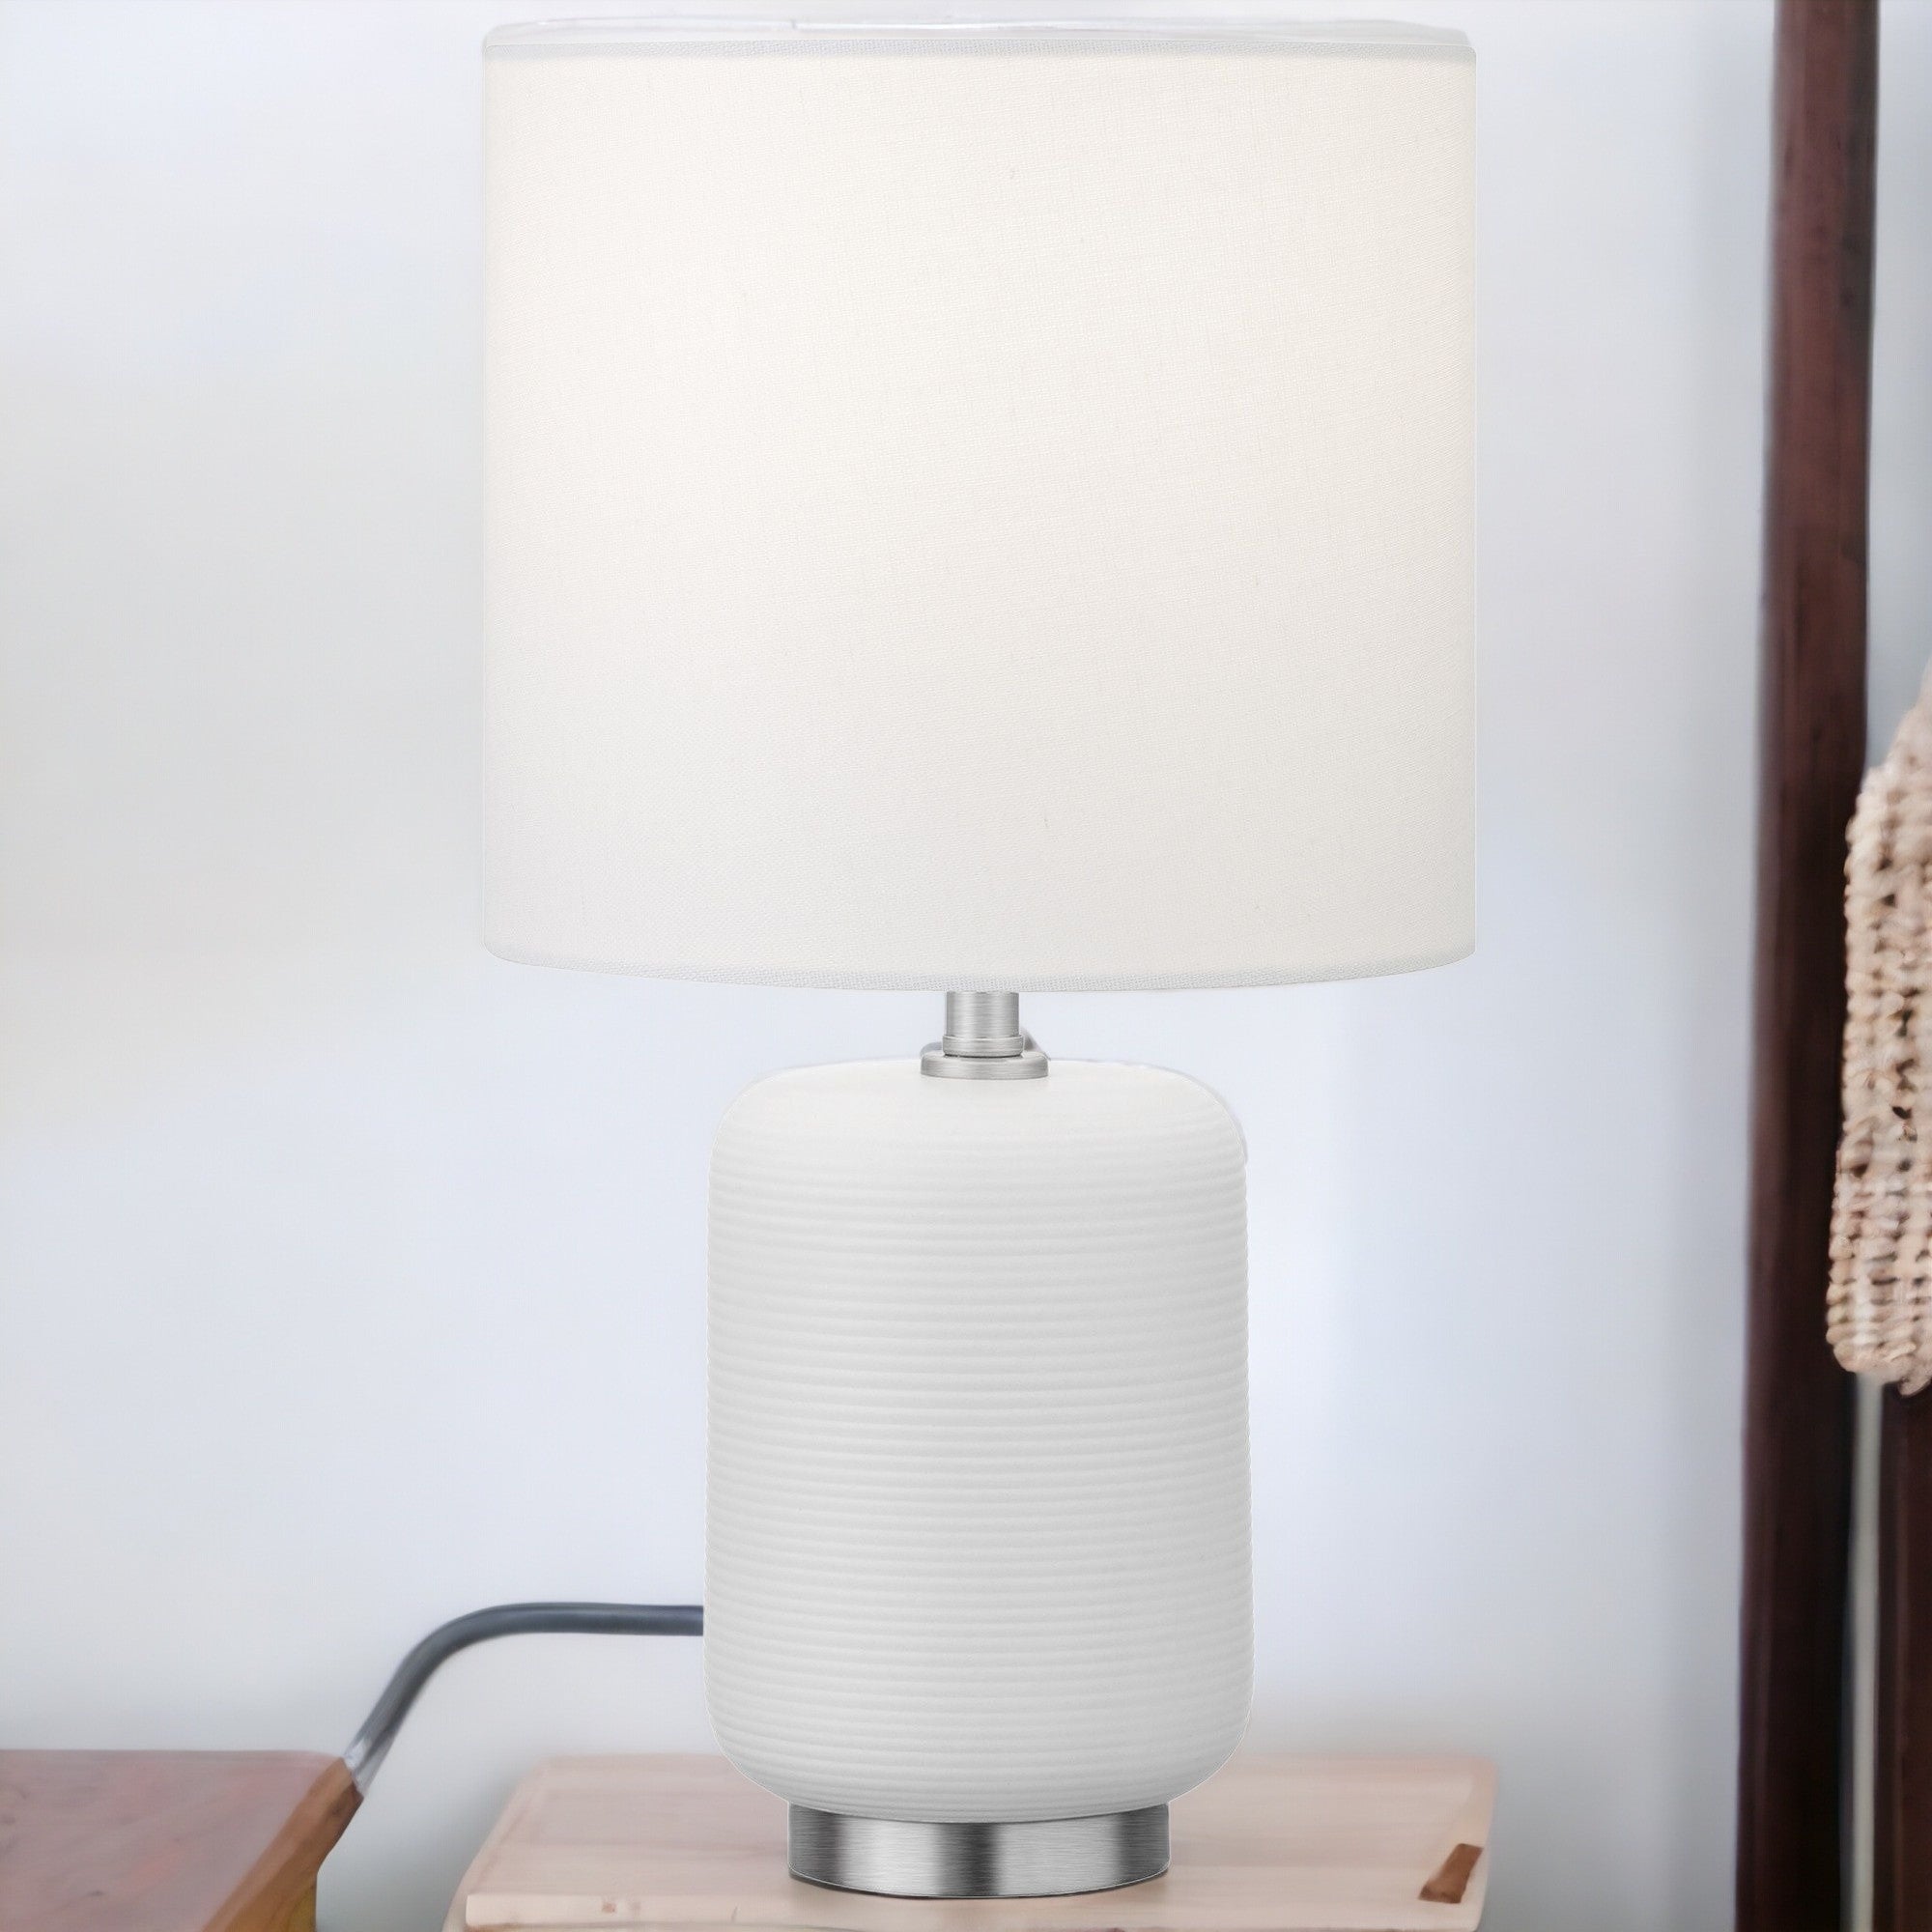 15" White and Silver Ceramic Cylinder Table Lamp With White Drum Shade